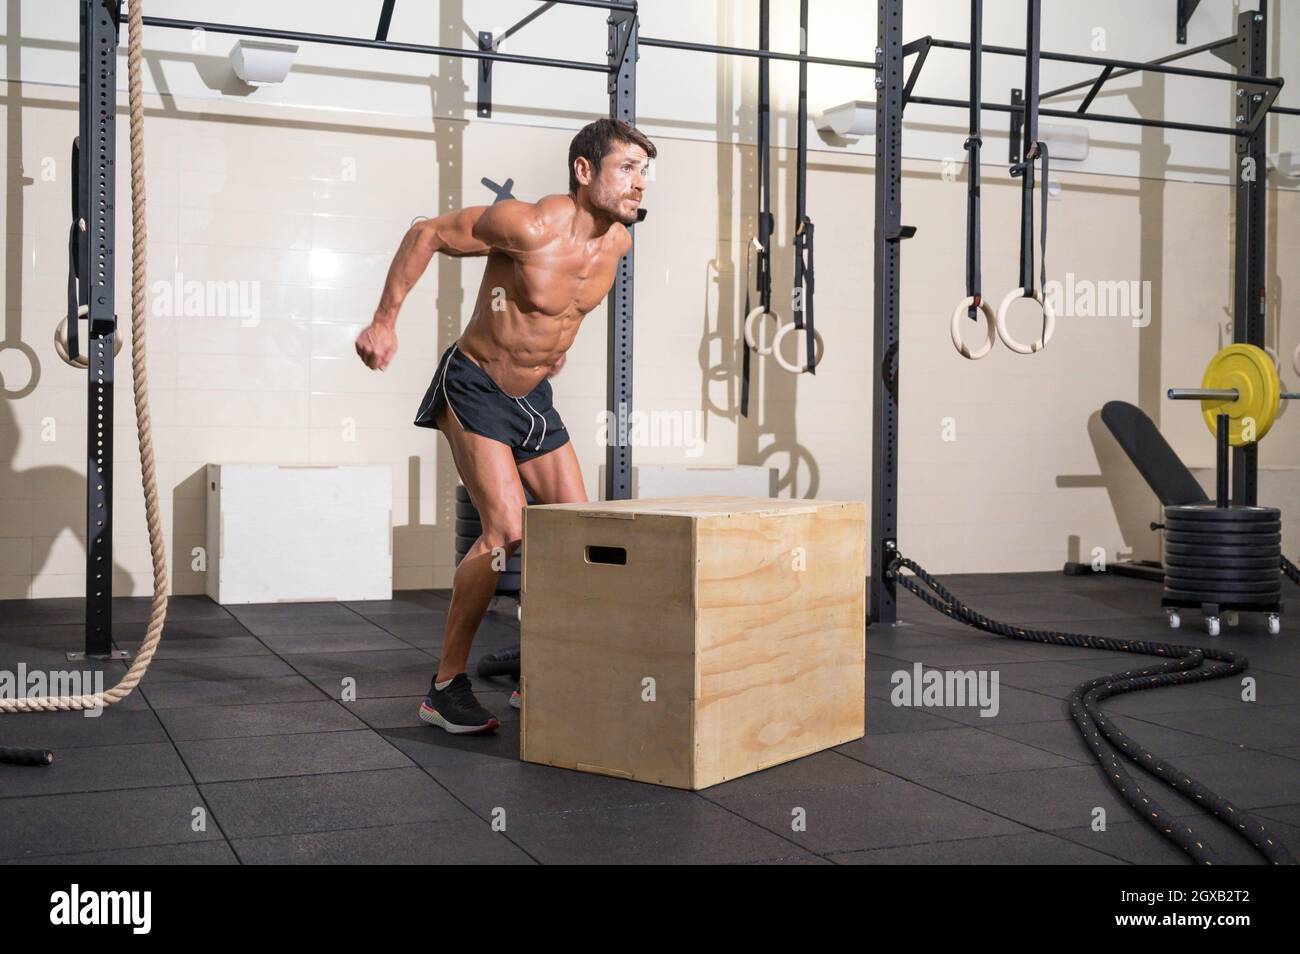 Muscular male athlete is practicing jumping on a wooden box in modern health club. Functional training. High quality photo. Stock Photo